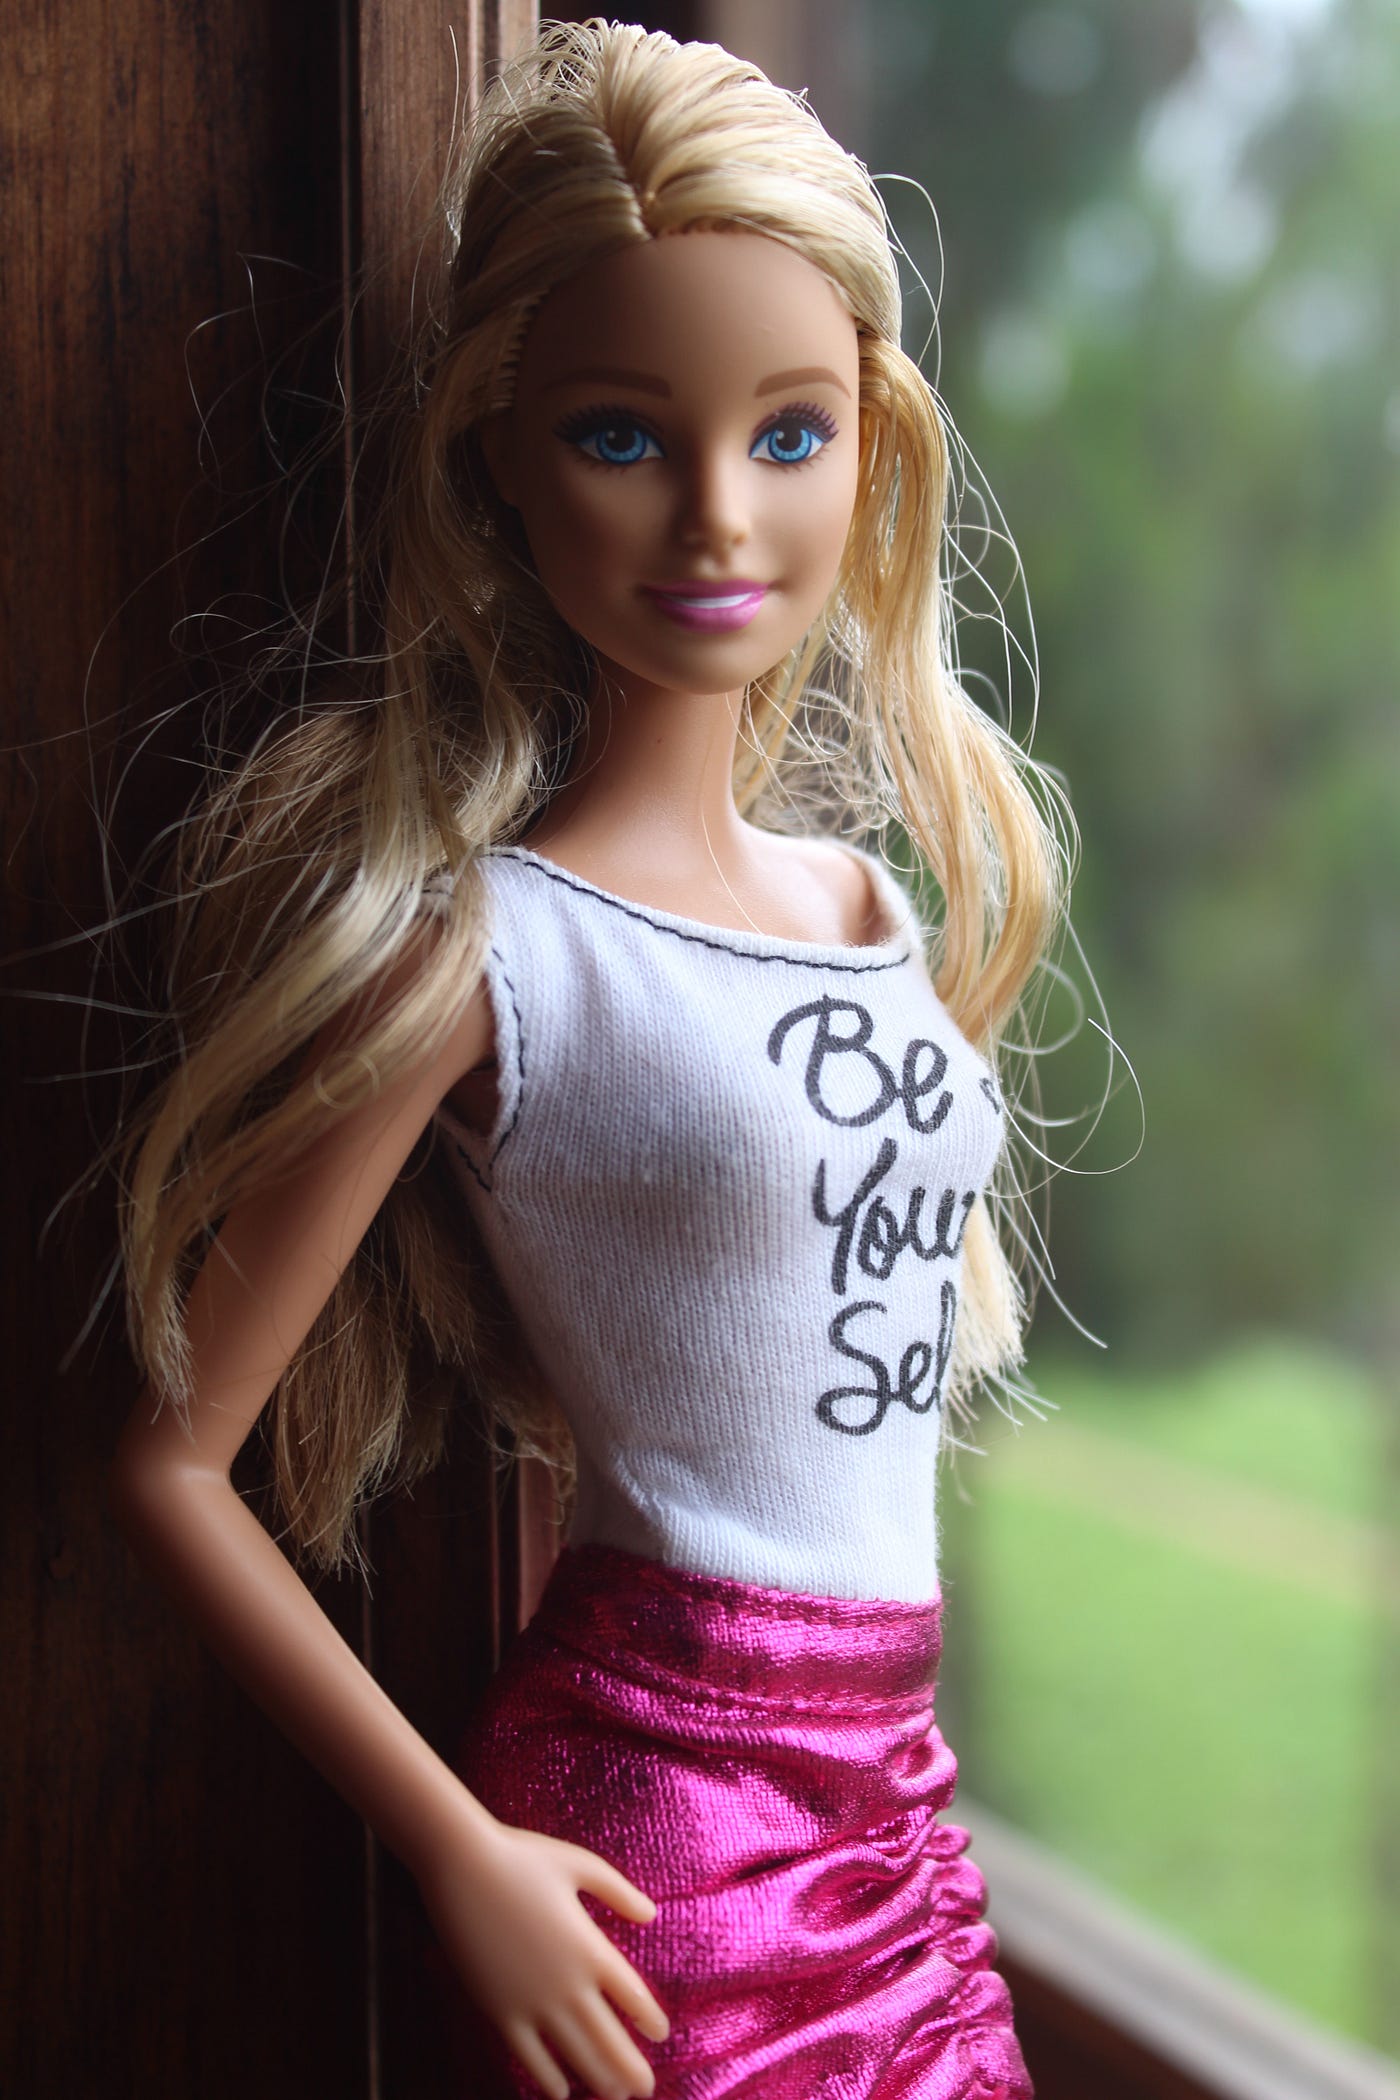 Barbie Fascism Poses A Brilliantly Evil Threat to Democracy | by Jessica  Wildfire | The Apeiron Blog